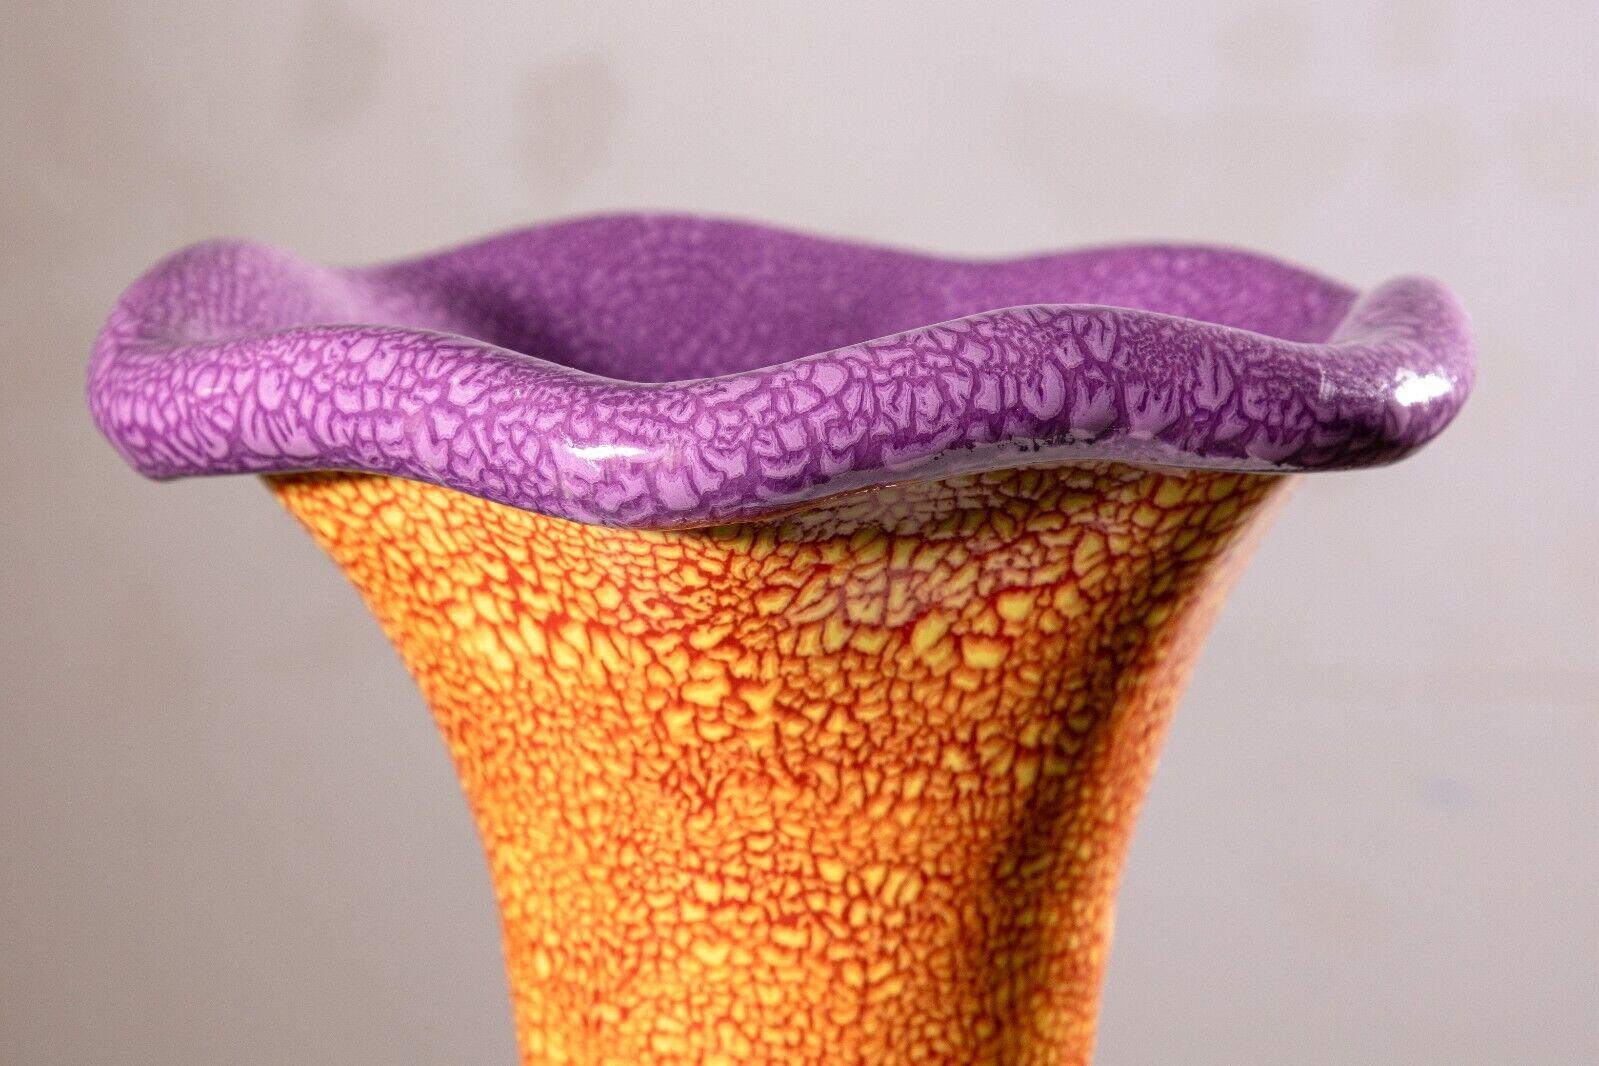 Kate Malone Orange and Purple Abstract Ceramic Vase In Good Condition For Sale In Keego Harbor, MI